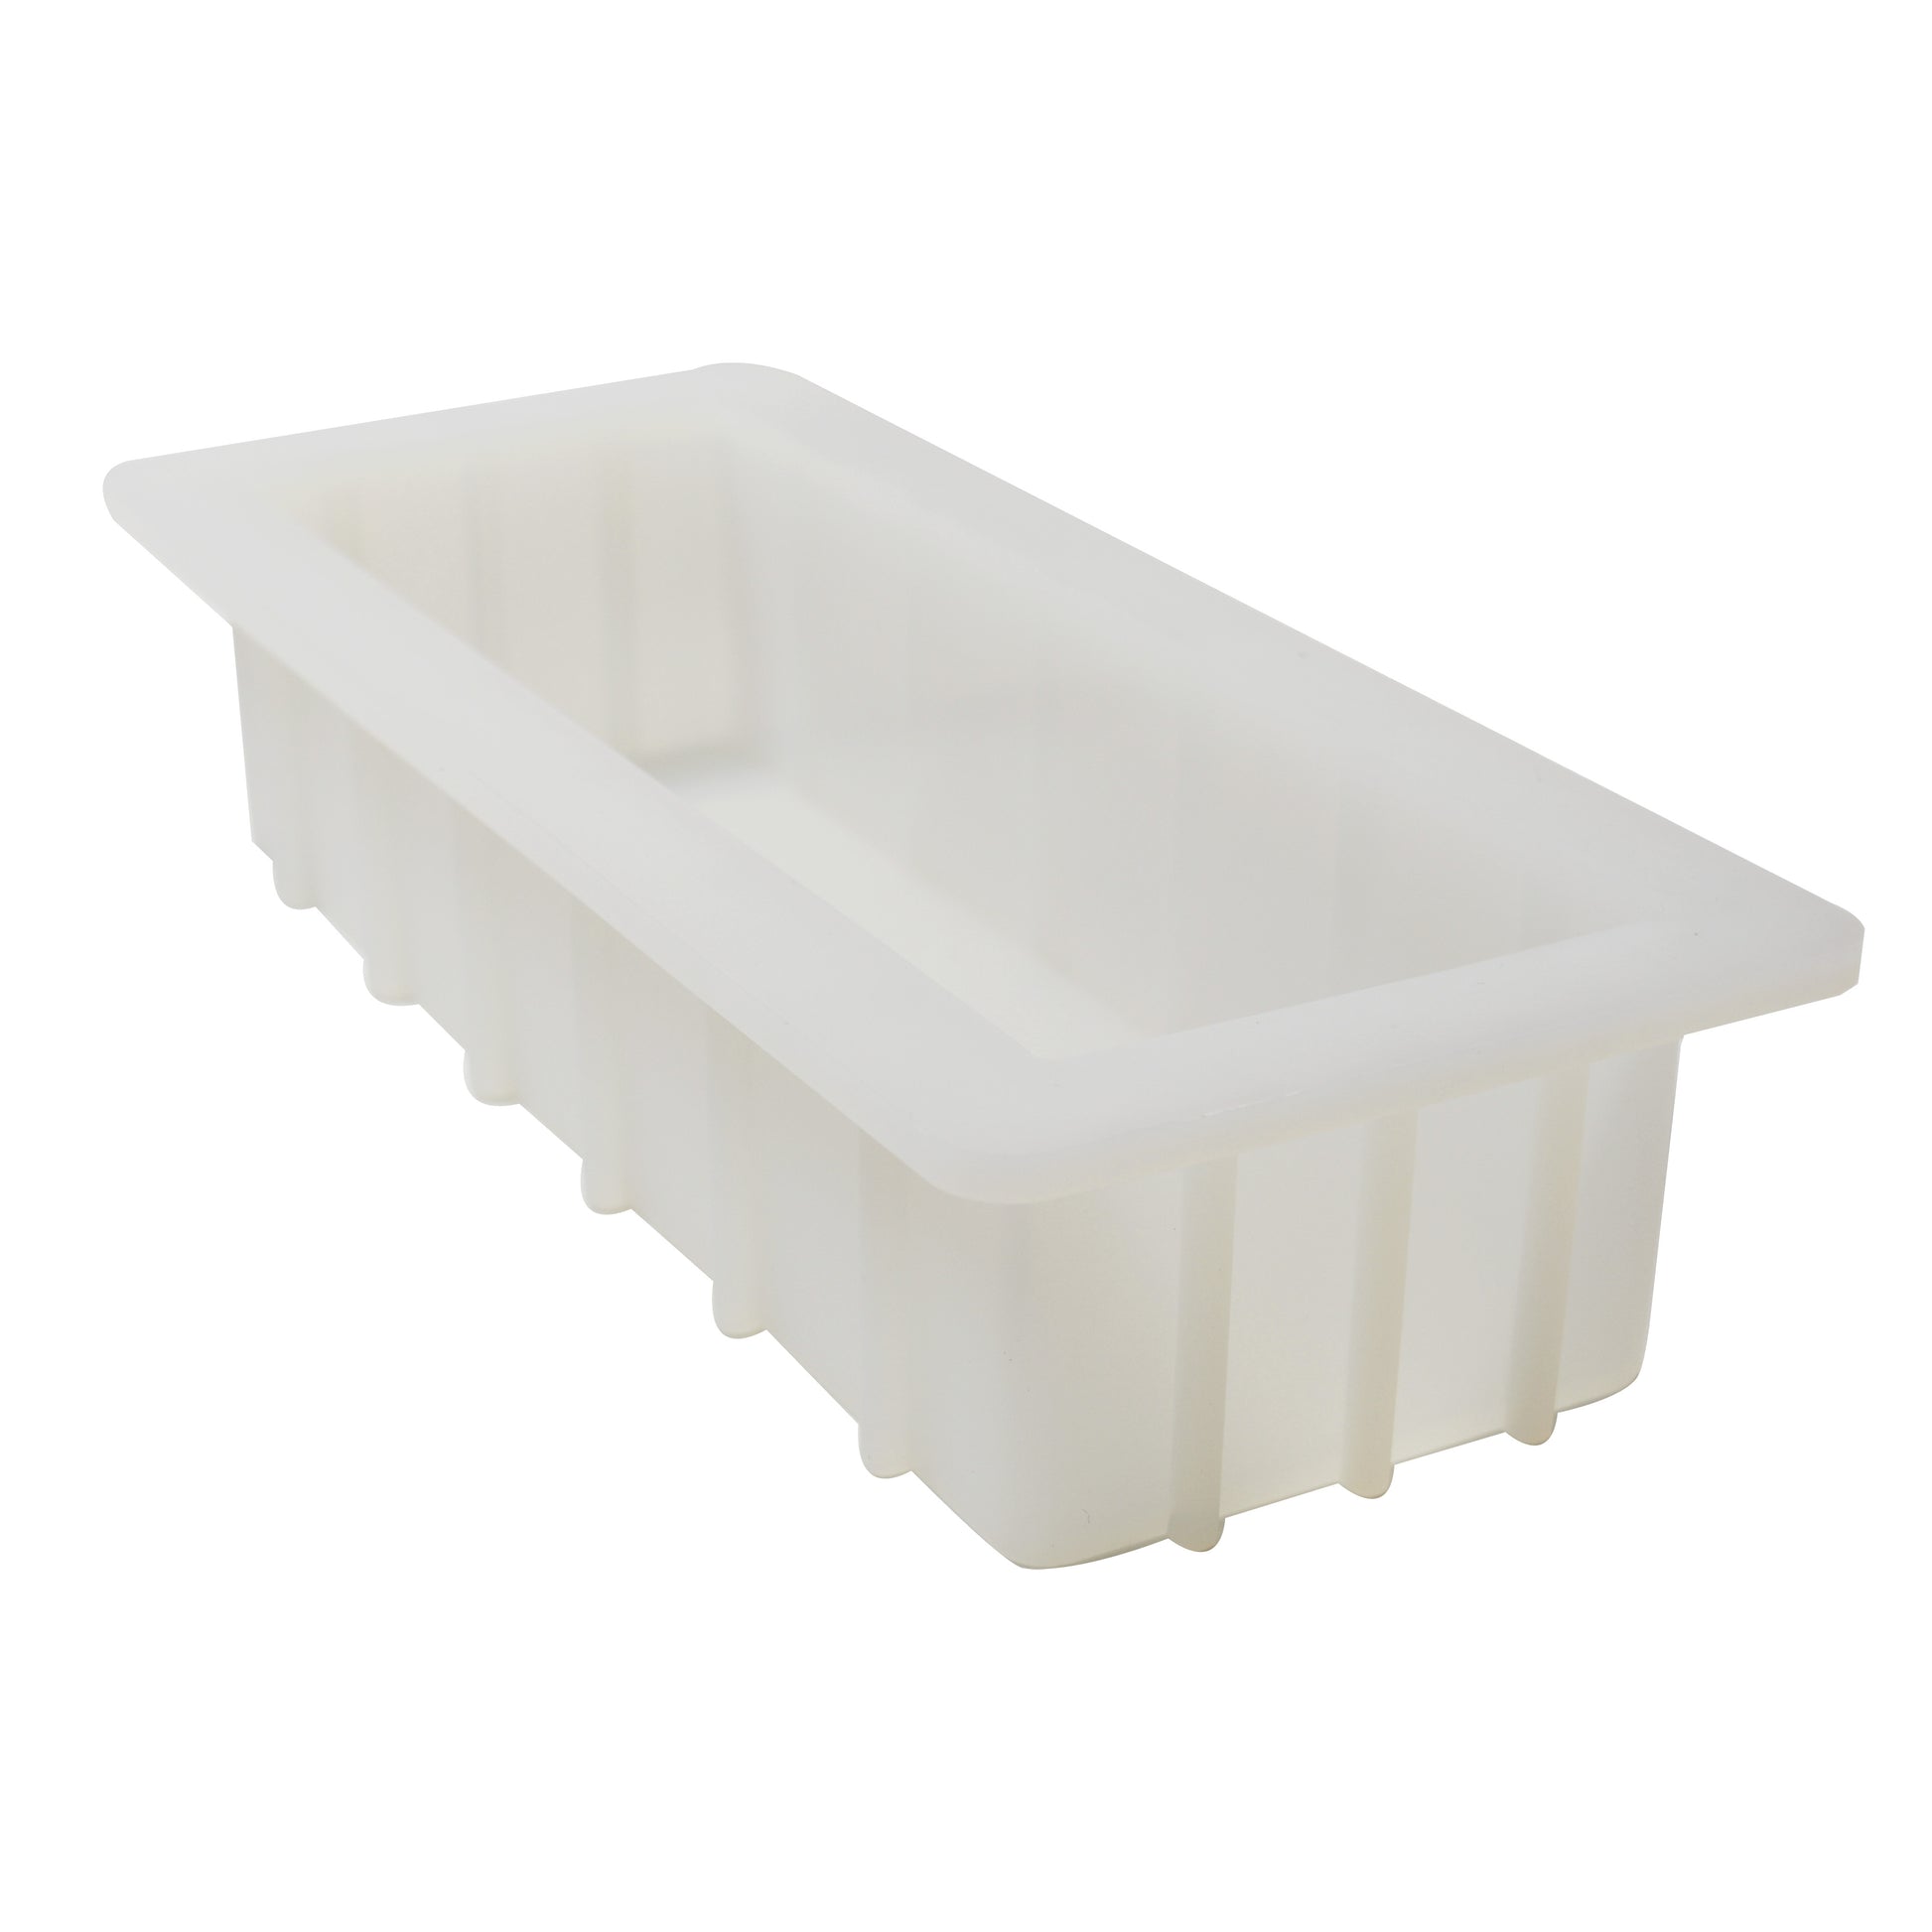 10 inch Silicone Loaf Mold